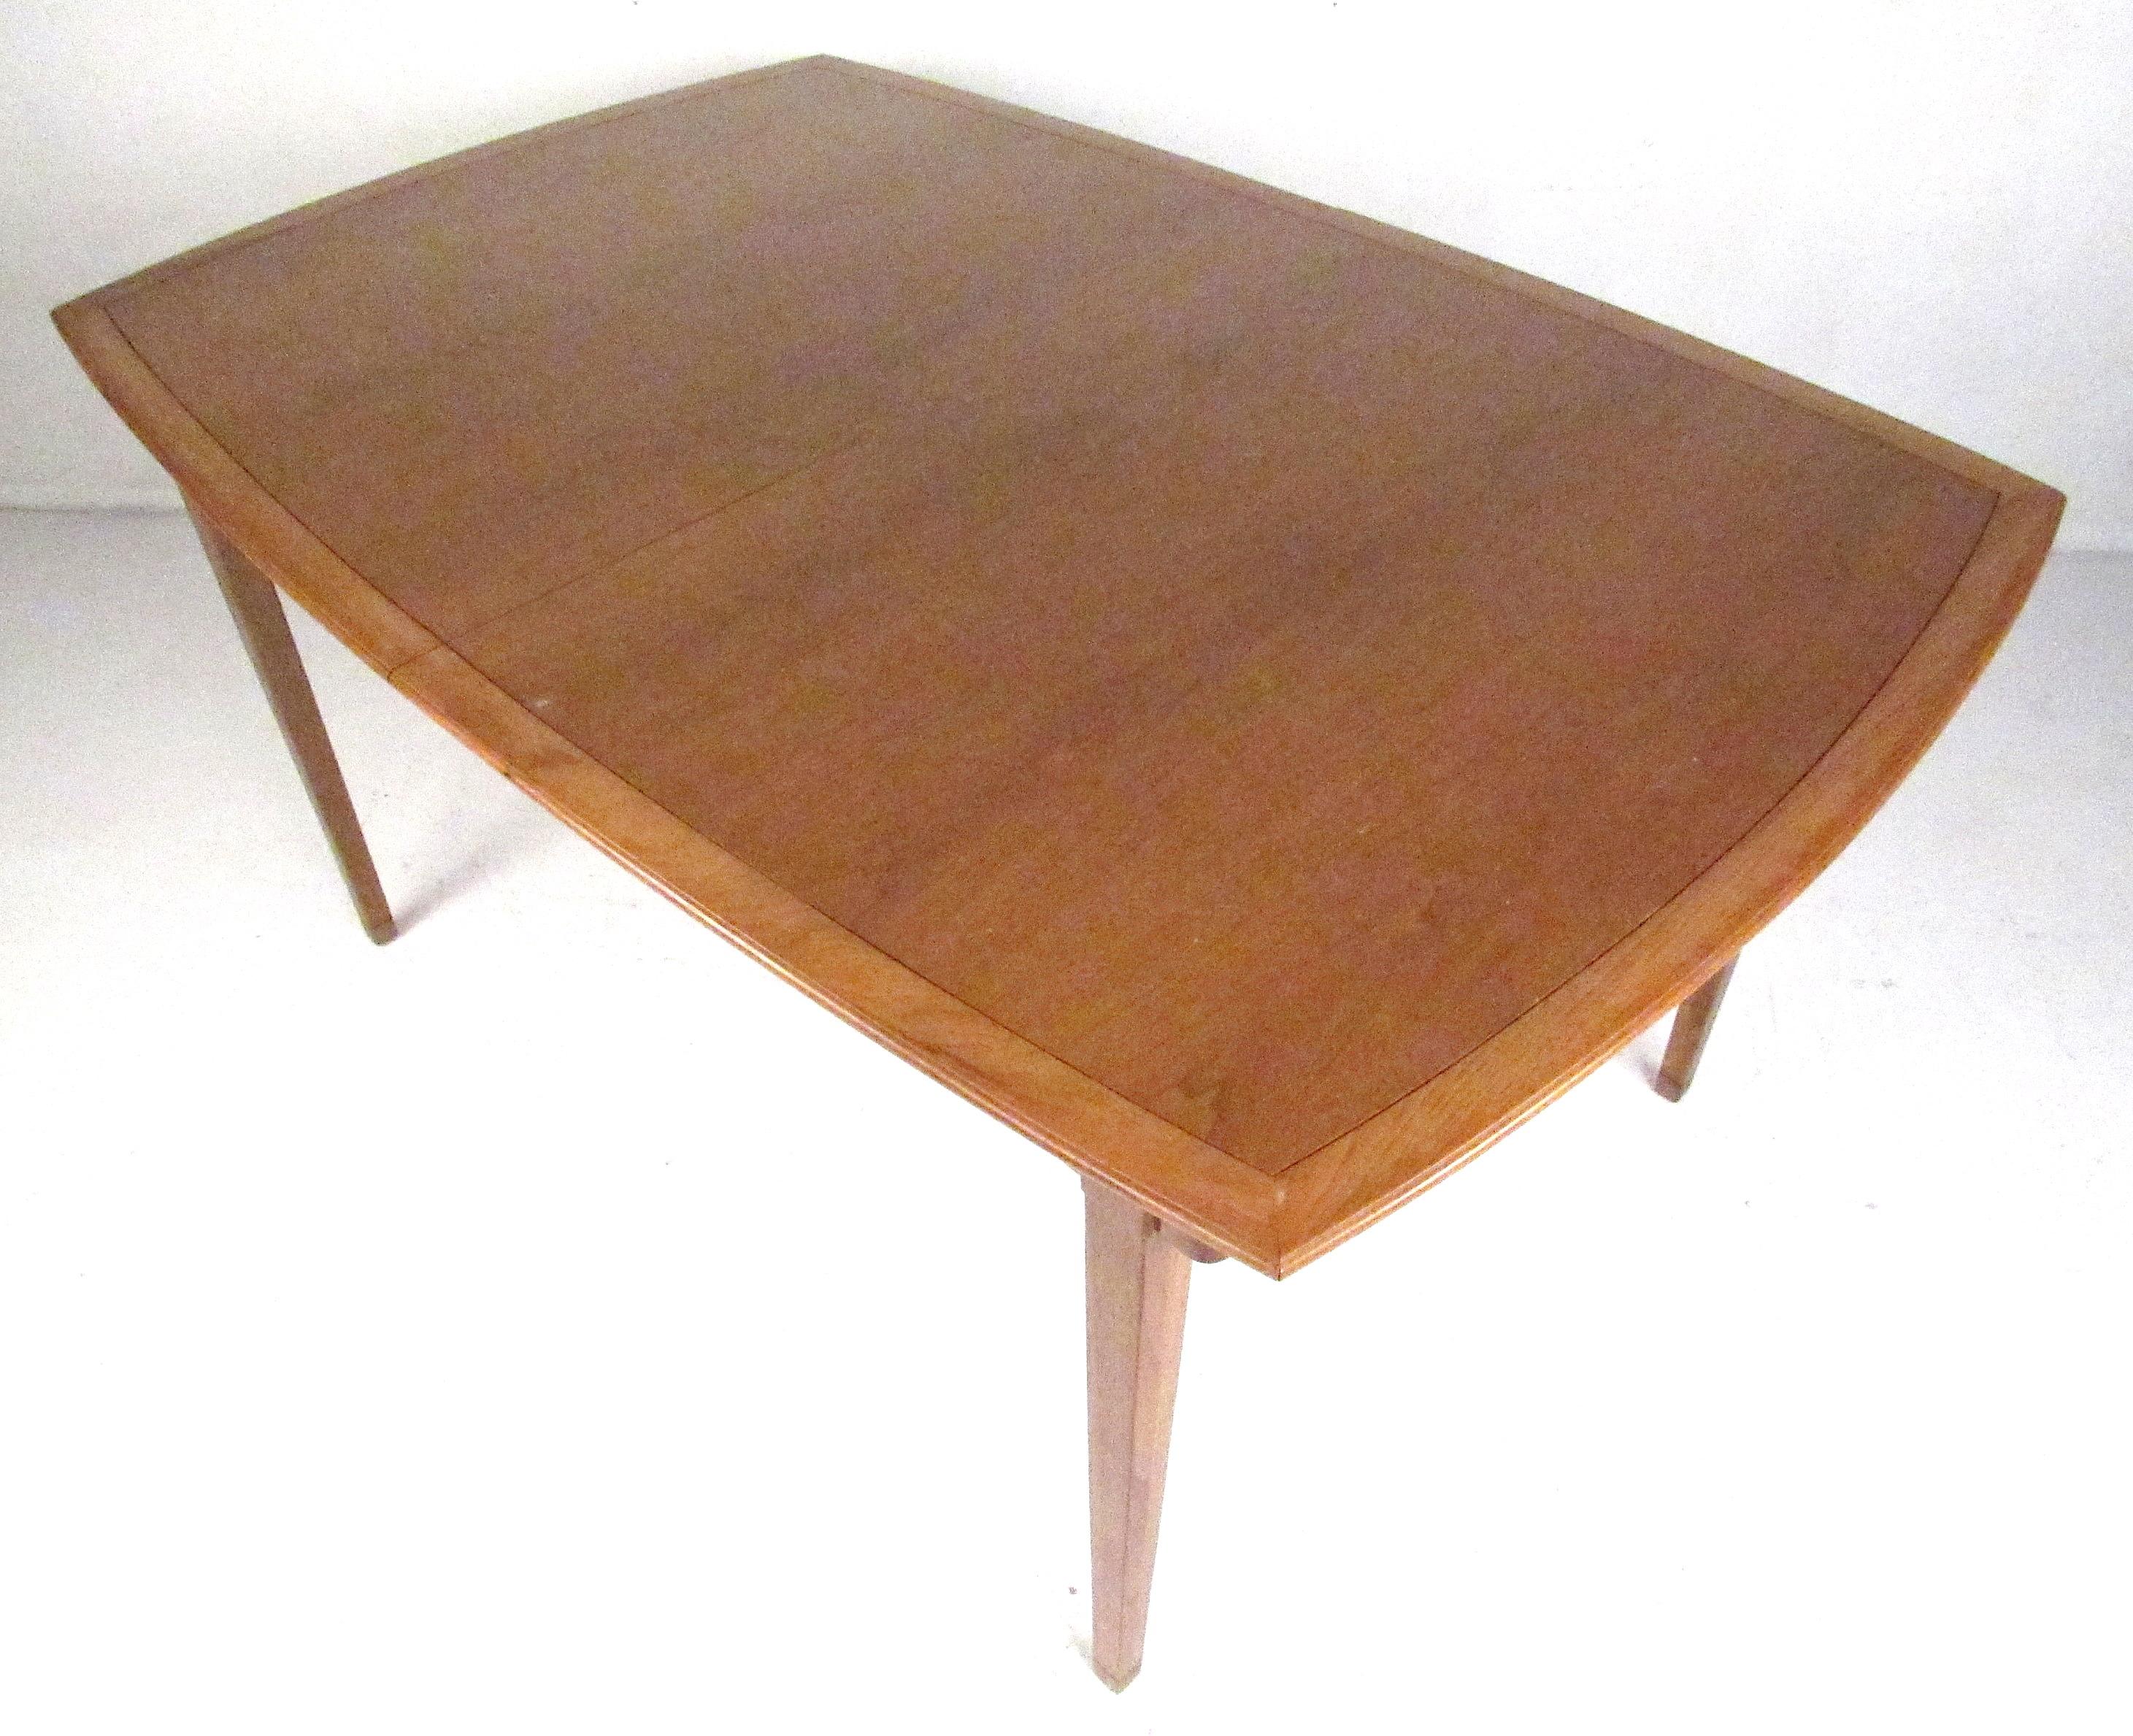 Midcentury dining table with six chairs from the 